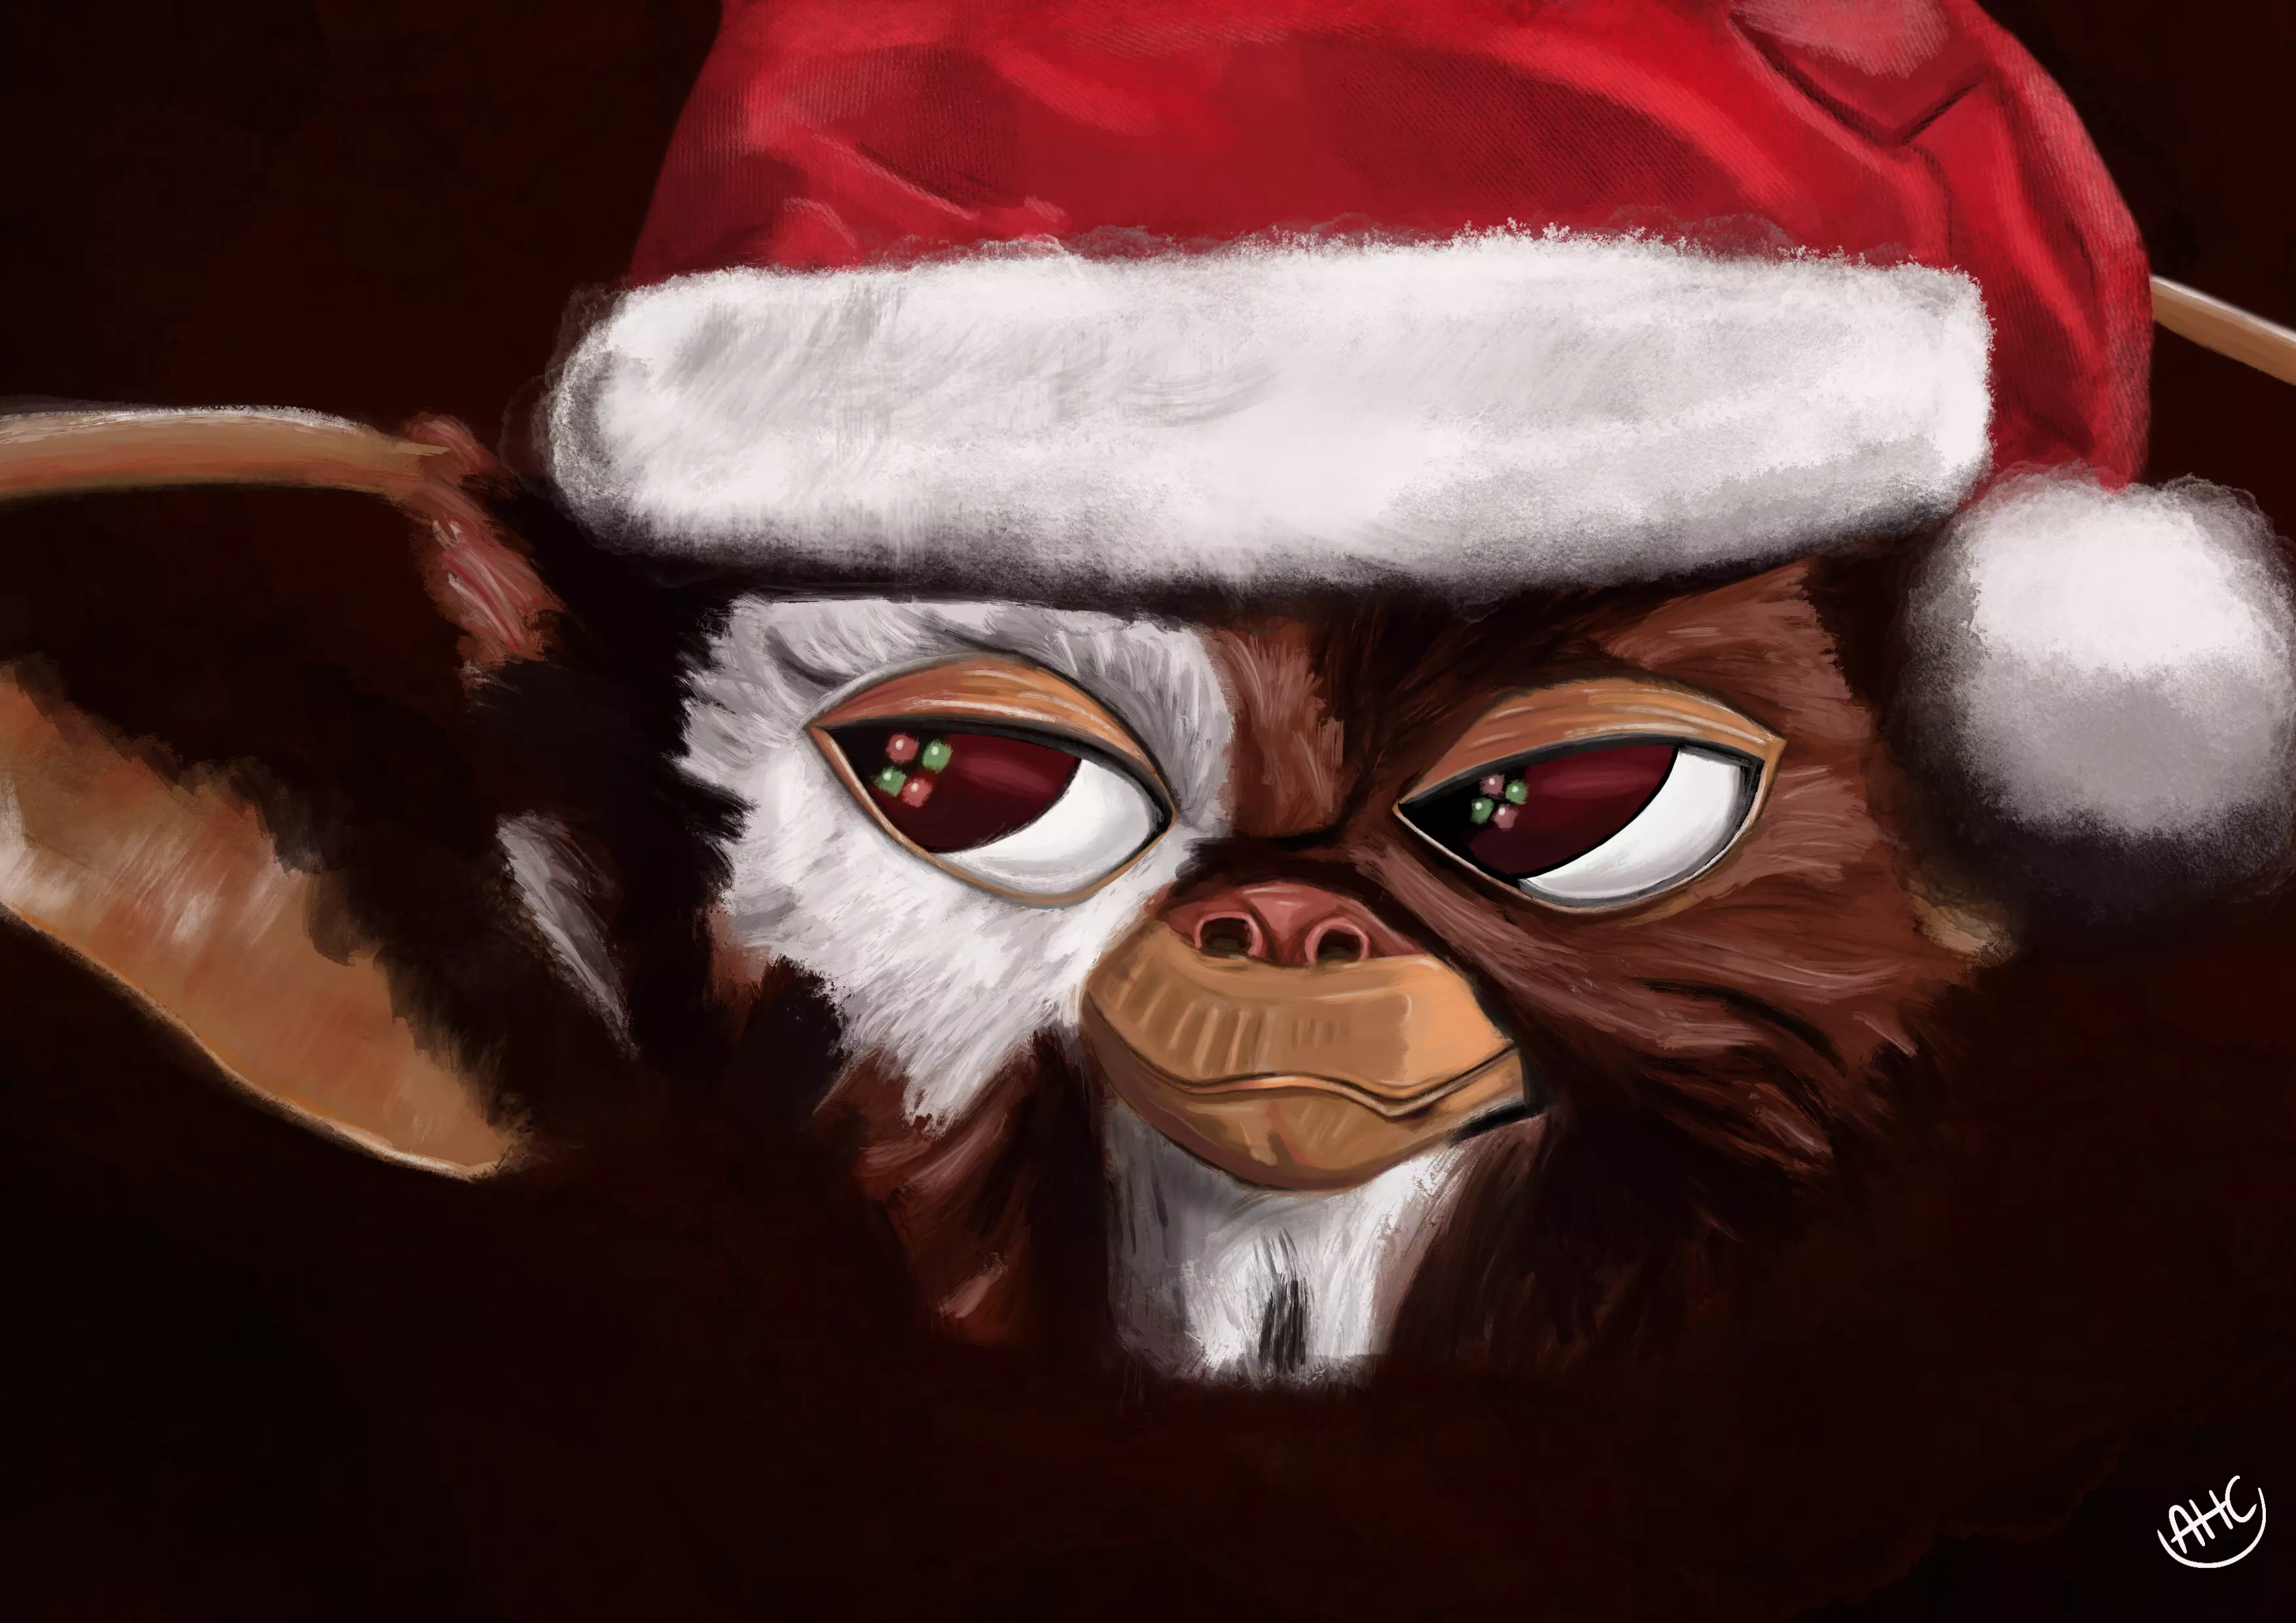 Gizmo from Gremlins wearing a Santa hat